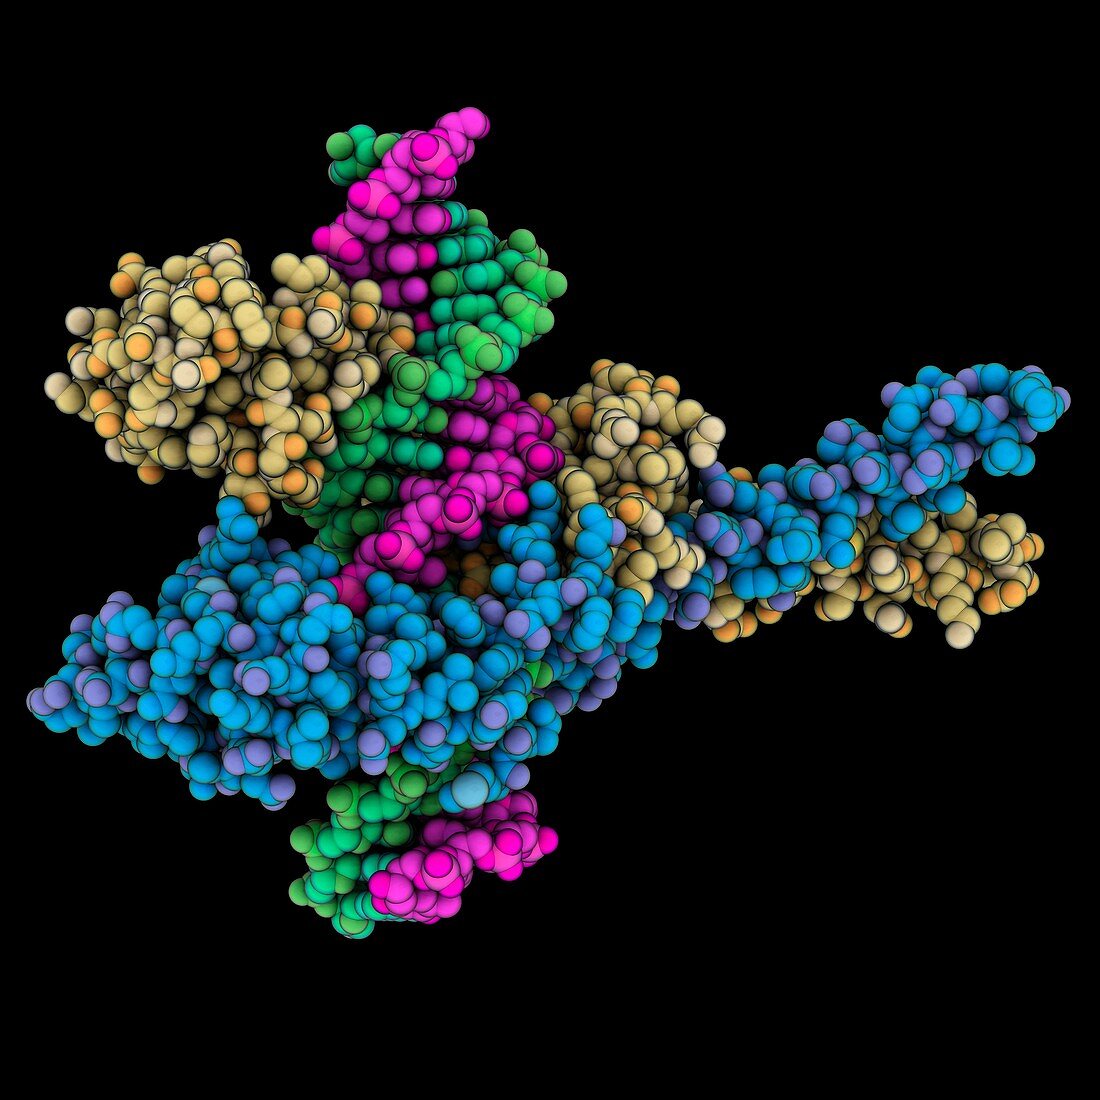 Macrodomain Ter protein DNA complex